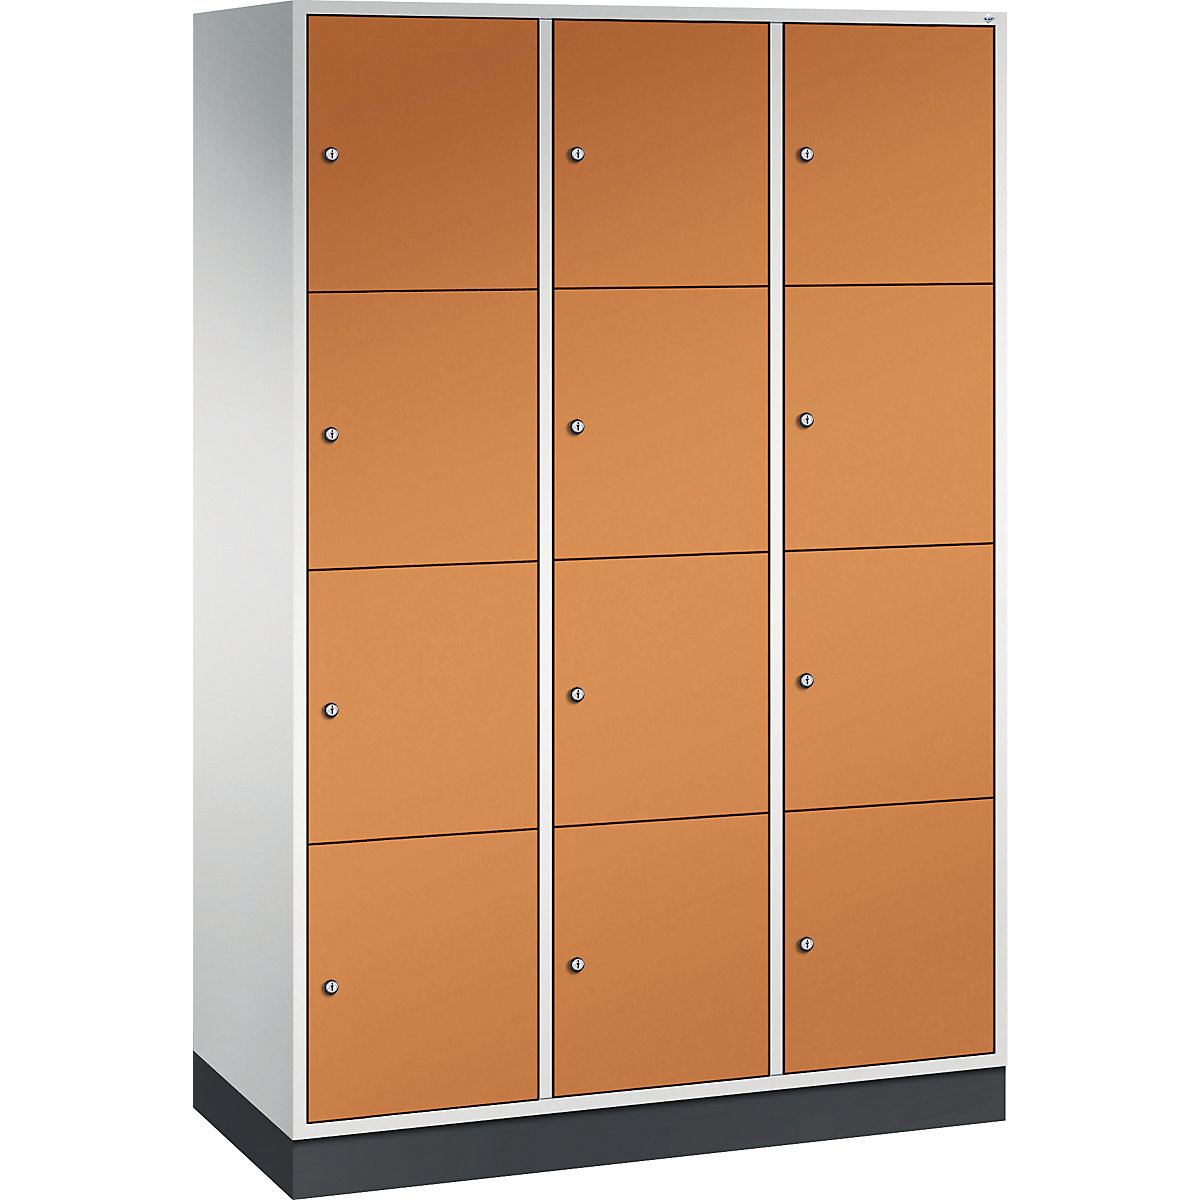 INTRO steel compartment locker, compartment height 435 mm – C+P, WxD 1220 x 500 mm, 12 compartments, light grey body, yellow orange doors